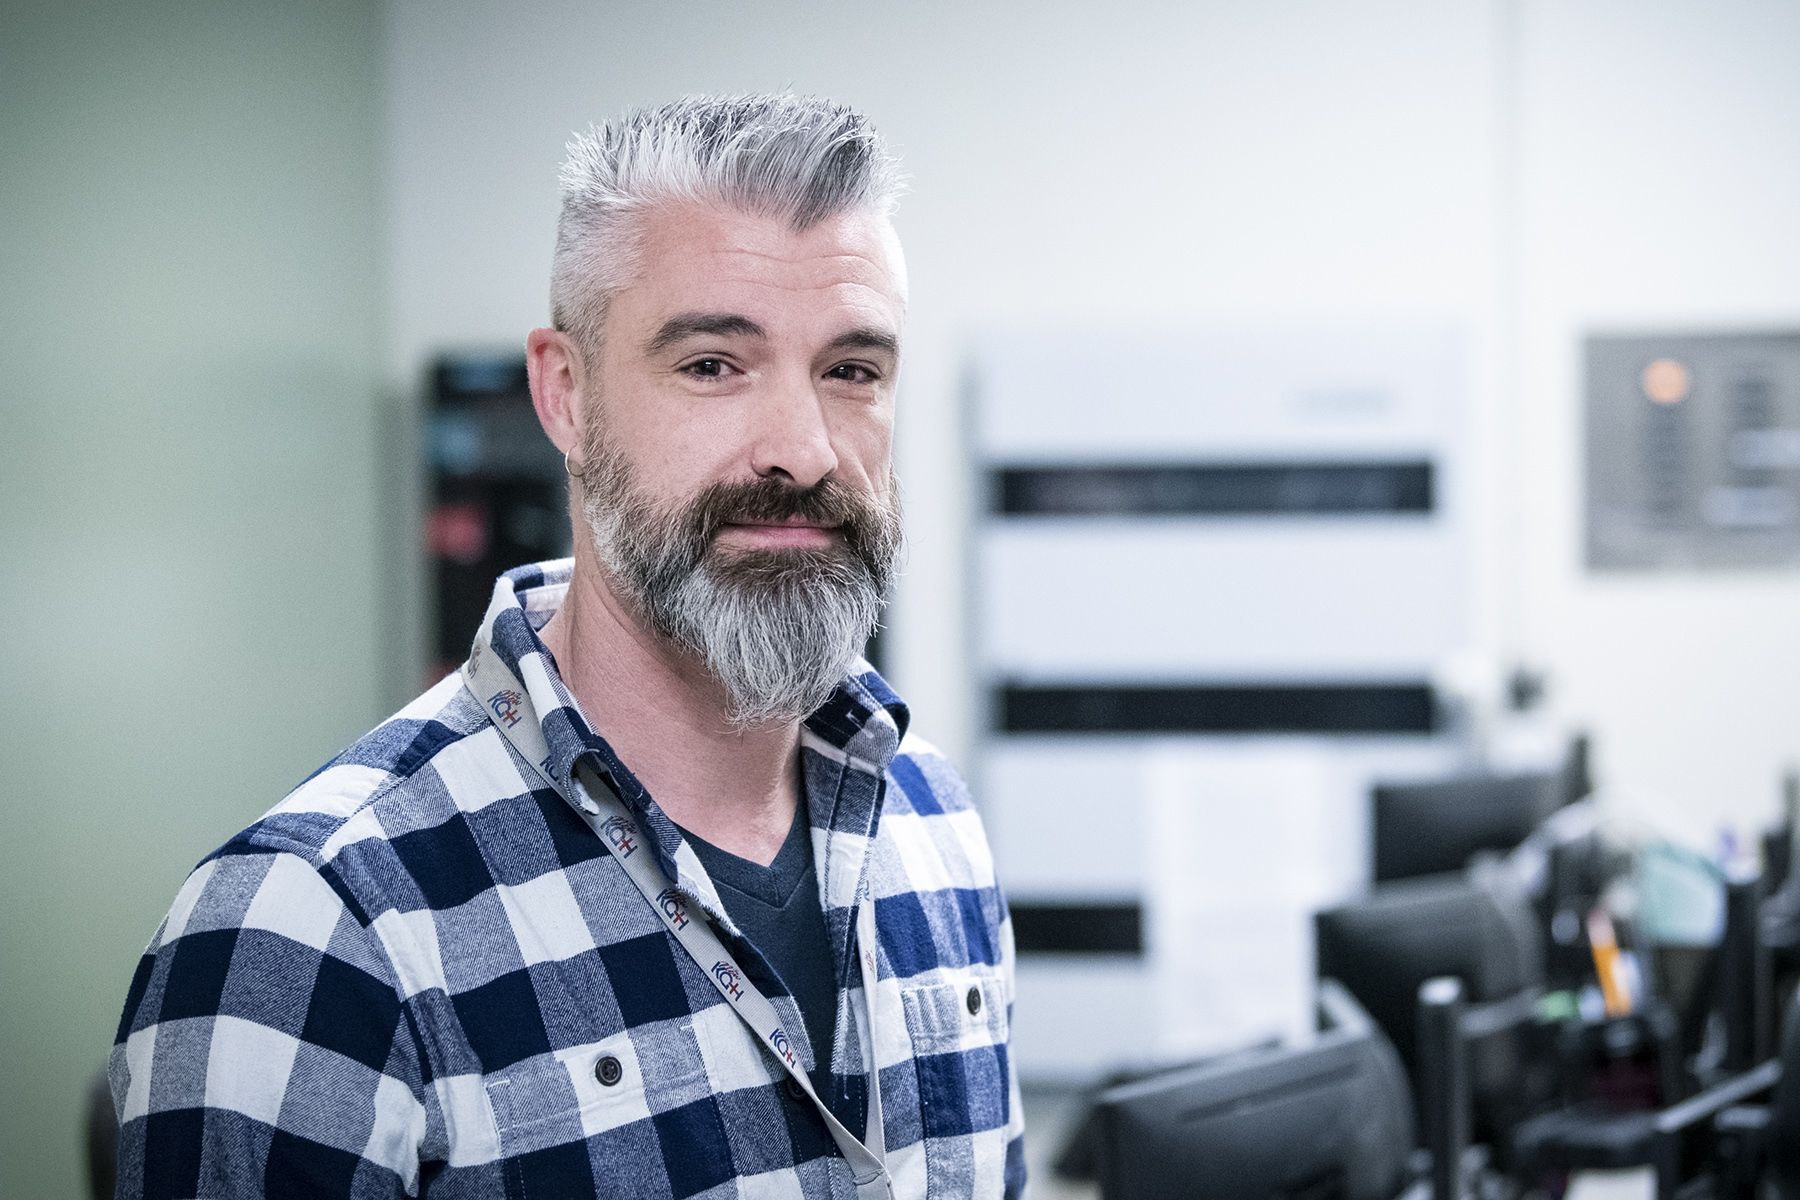 Mark Westcott is pictured in the Switchboard department at the KGH site. He has dark brown eyes, salt and pepper, spiky hair and a beard. He’s wearing a blue and white plaid, long-sleeved shirt. 